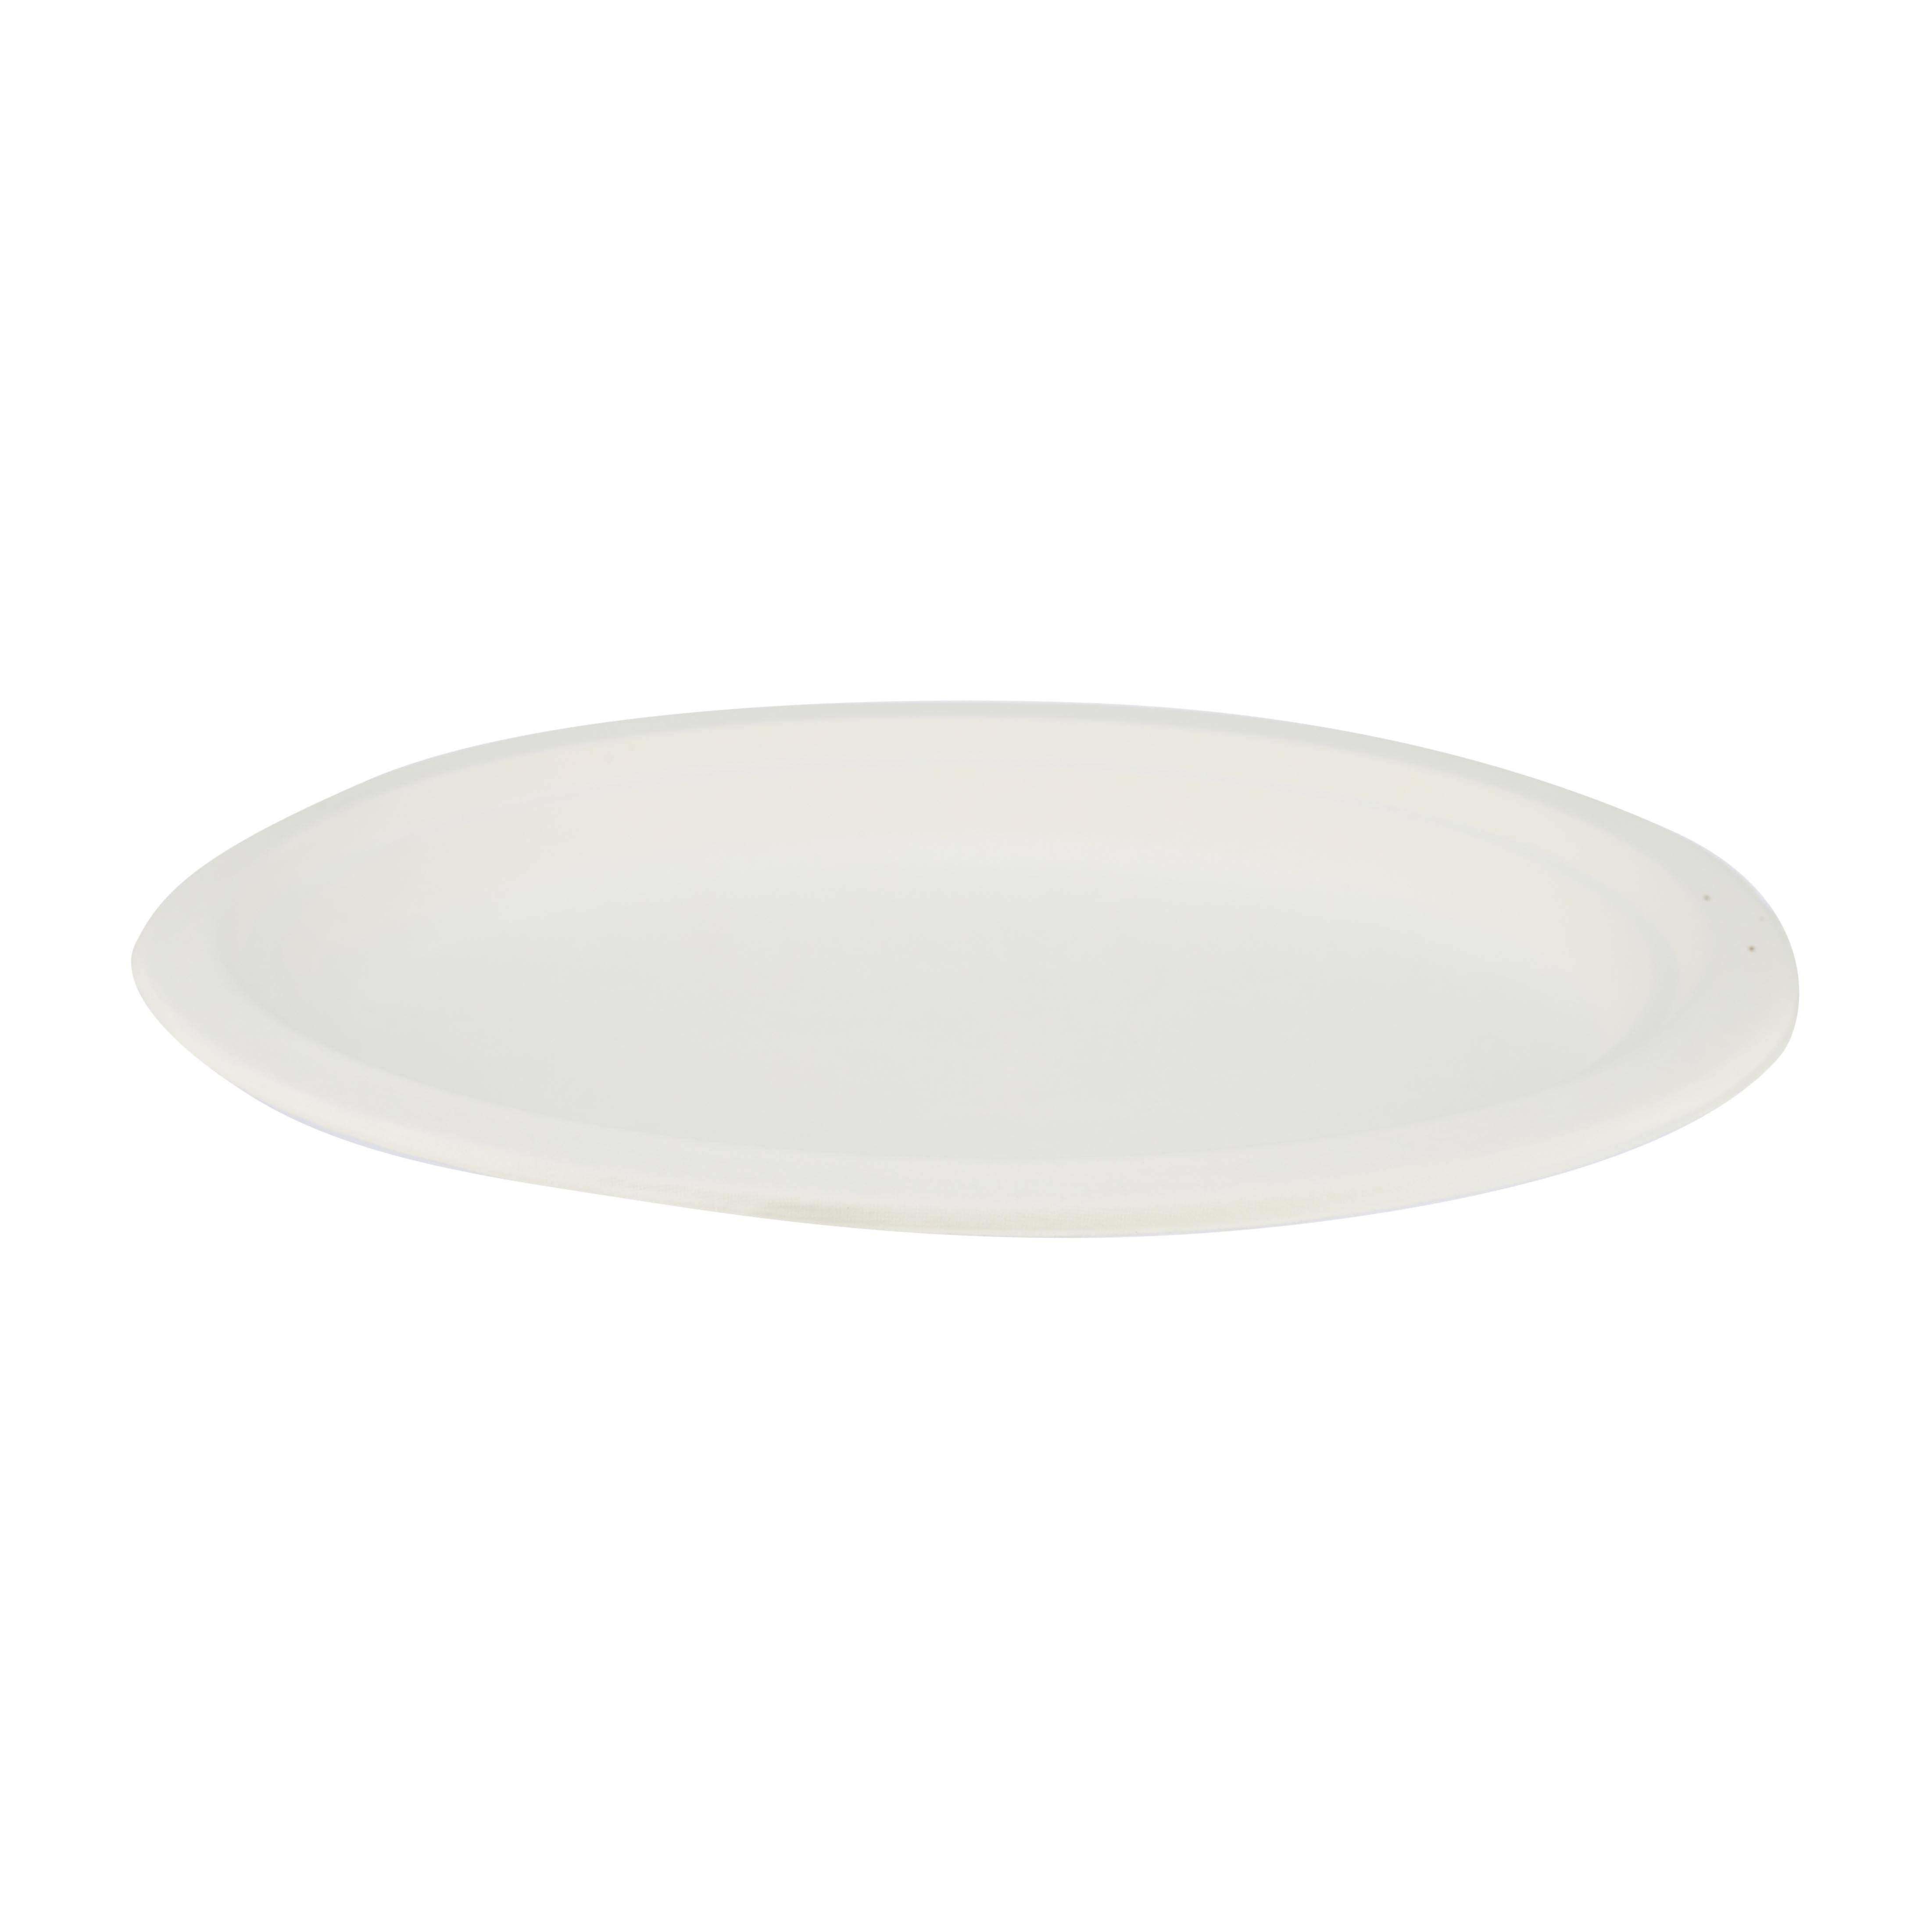 Bio-Degradable Oval Plate 10x8 Inch 200 Pieces - Hotpack Global